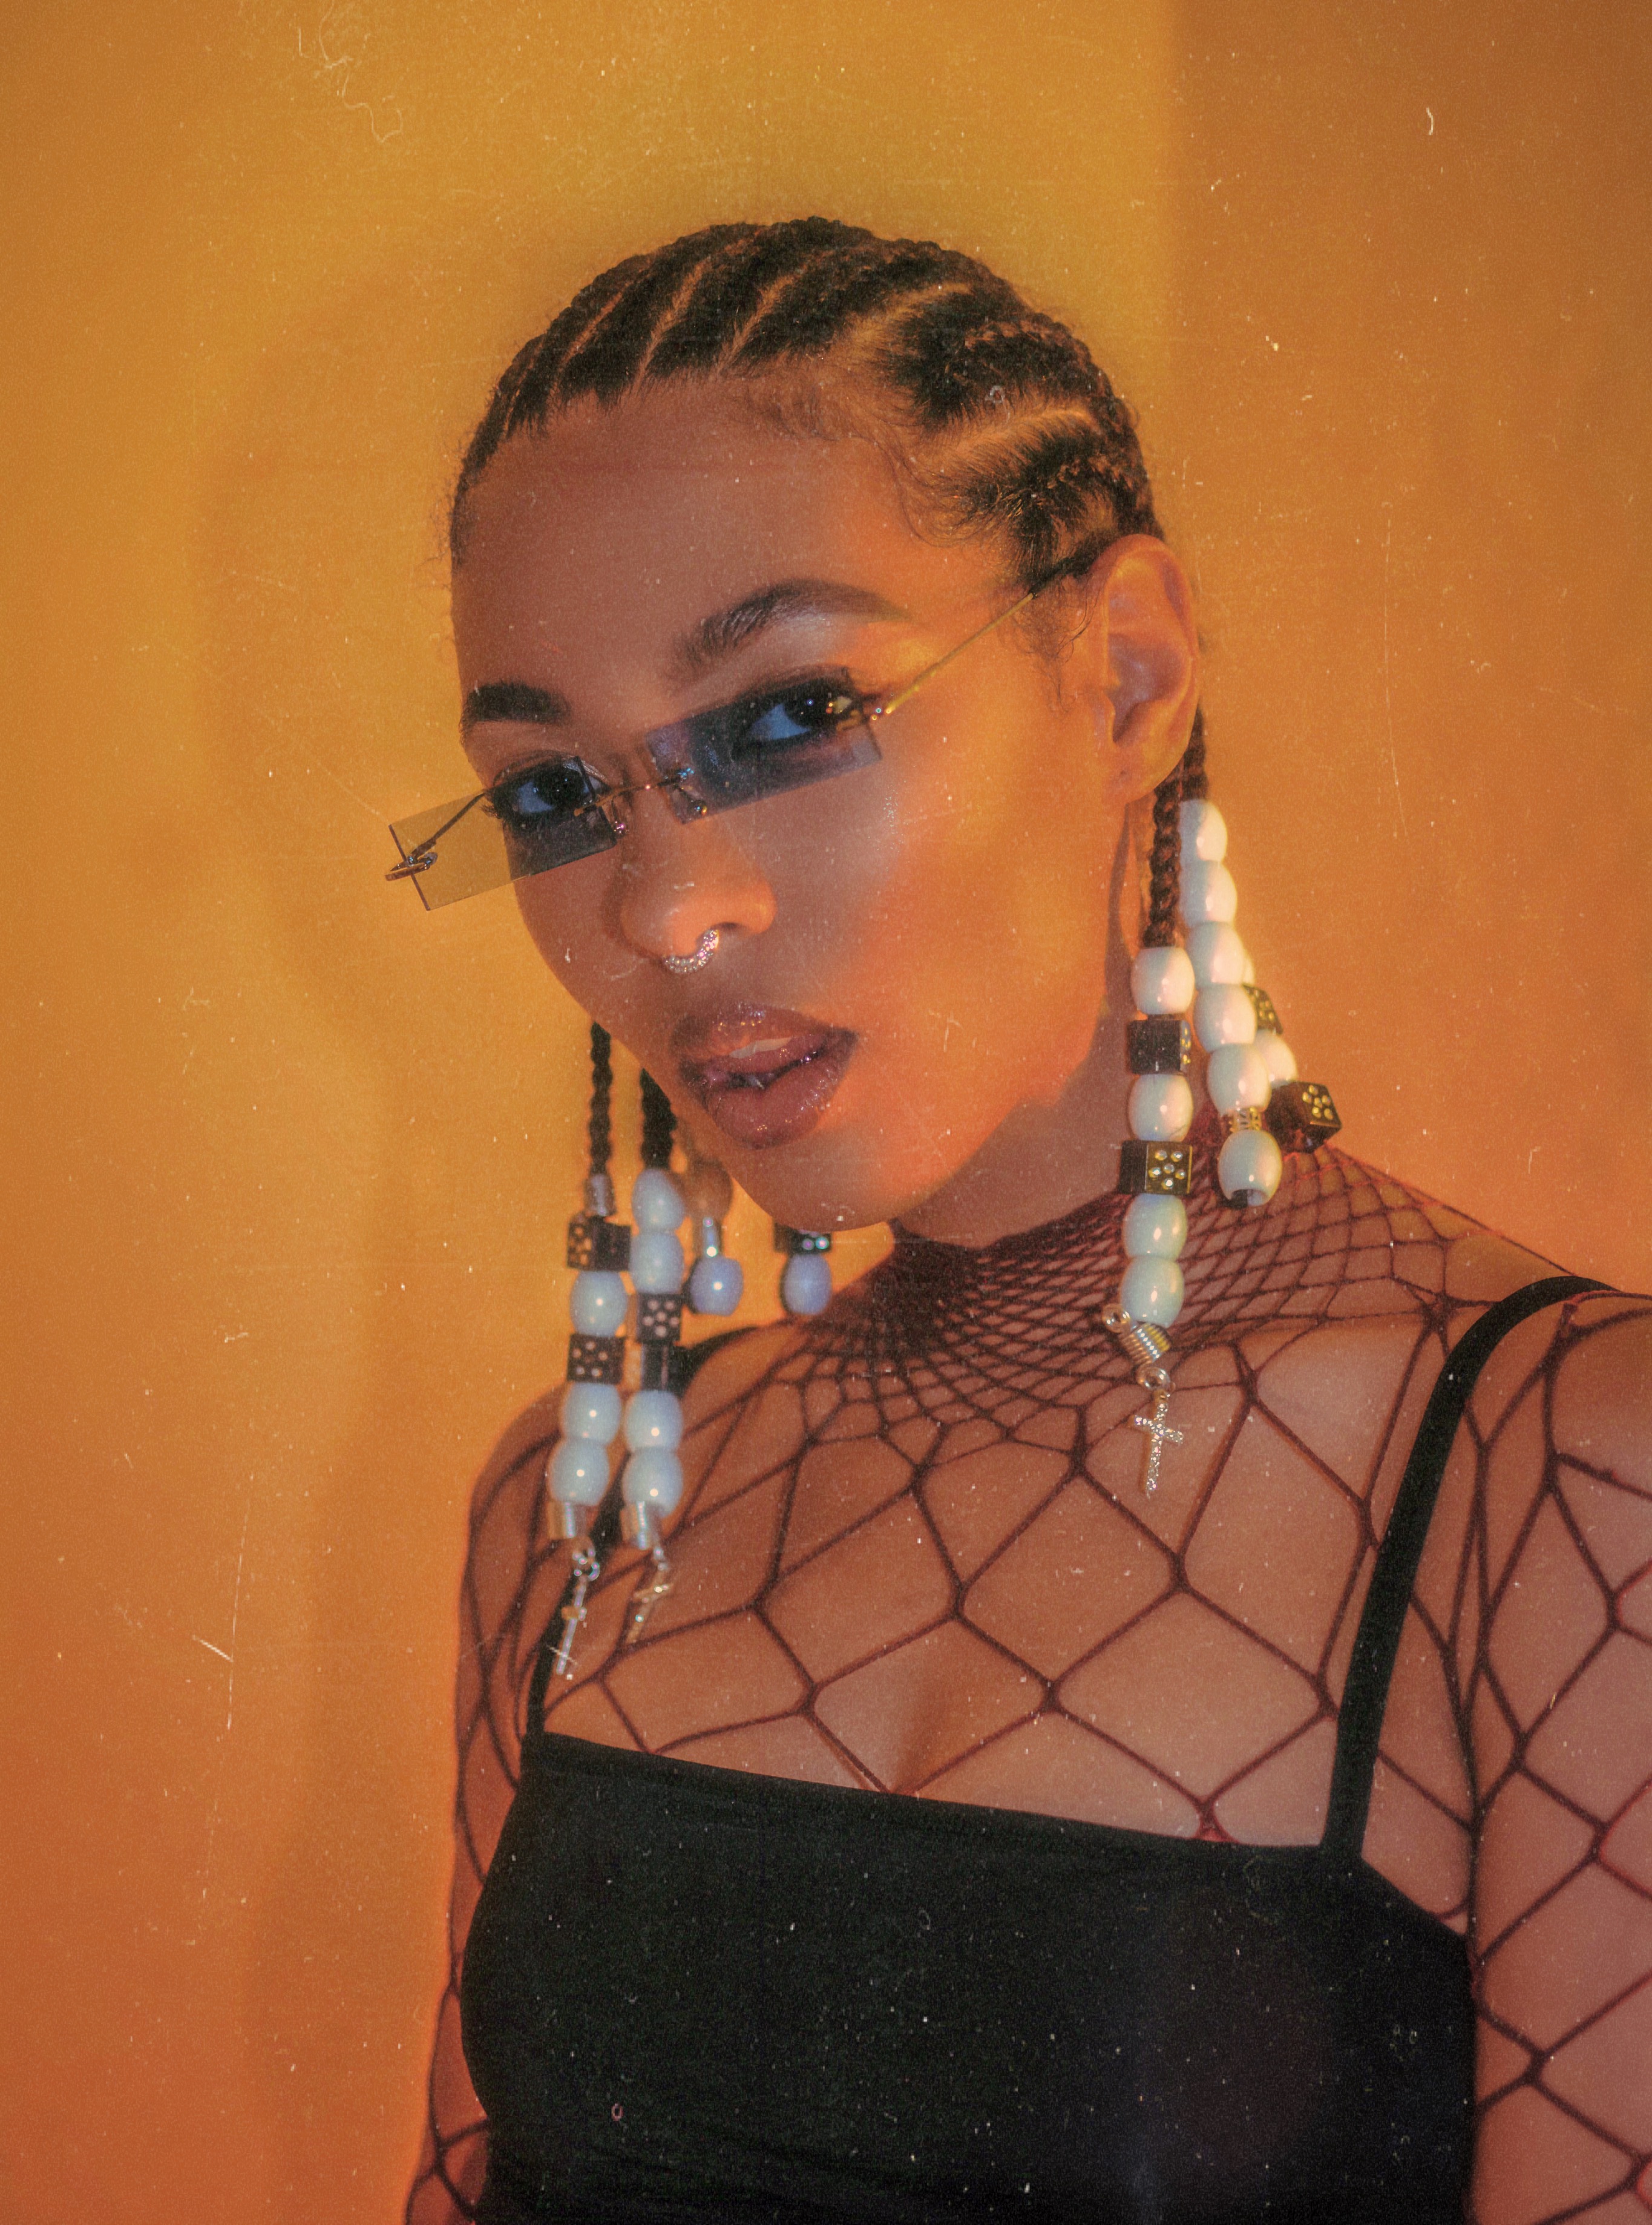 Dizzy Fae on being a liberated queer woman of colour in the music industry